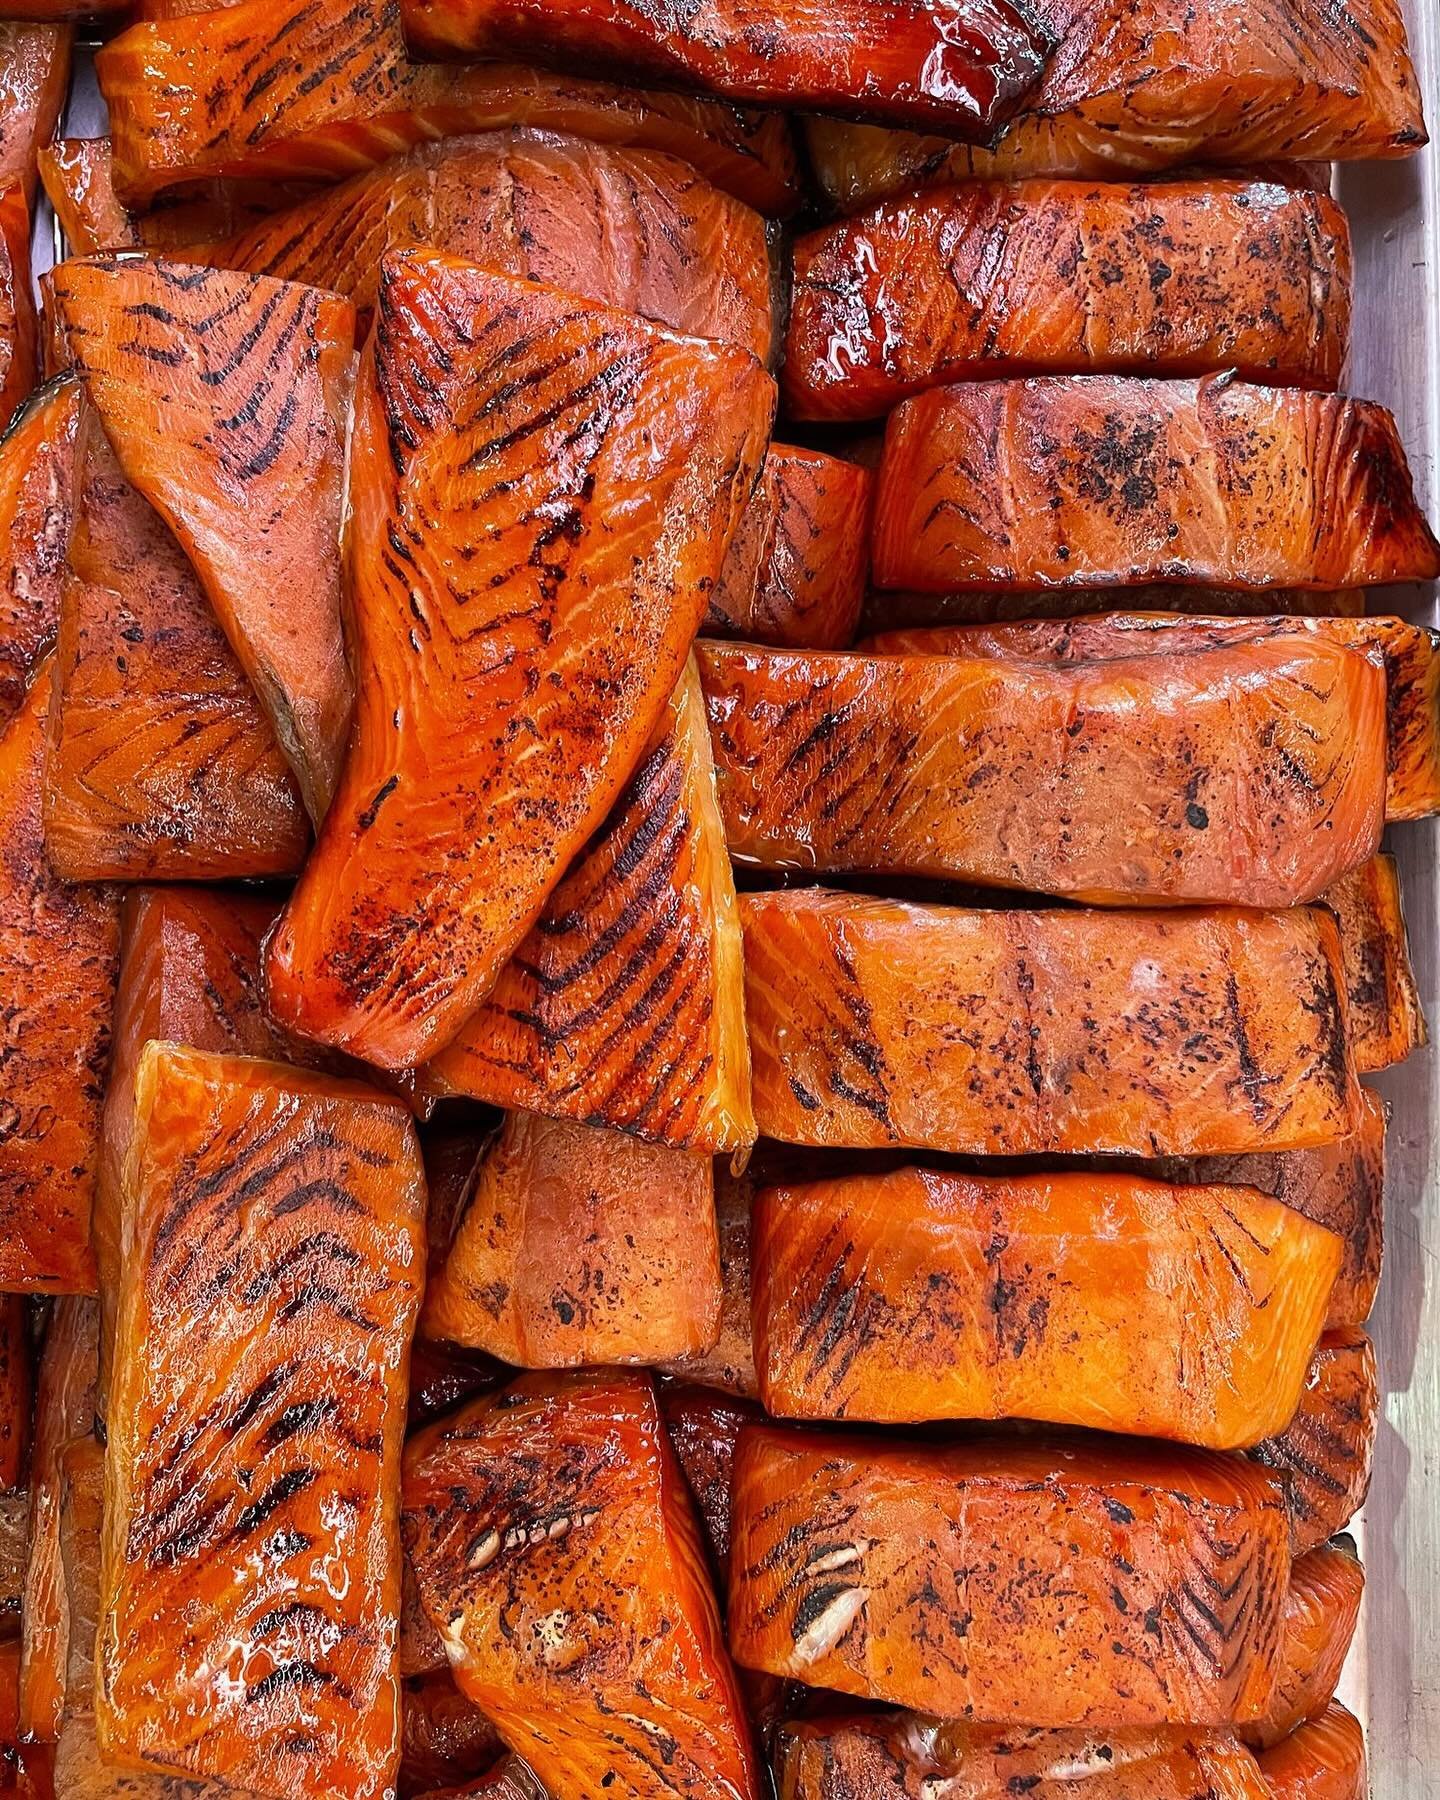 Hot Smoked Scottish Salmon available to ship nationwide! Each batch is hand cut and carefully dry brined, then delicately hot smoked with a blend of cherry wood and hickory.

No artificial preservatives - just salt, sugar &amp; smoke! 

Each 5lb incr